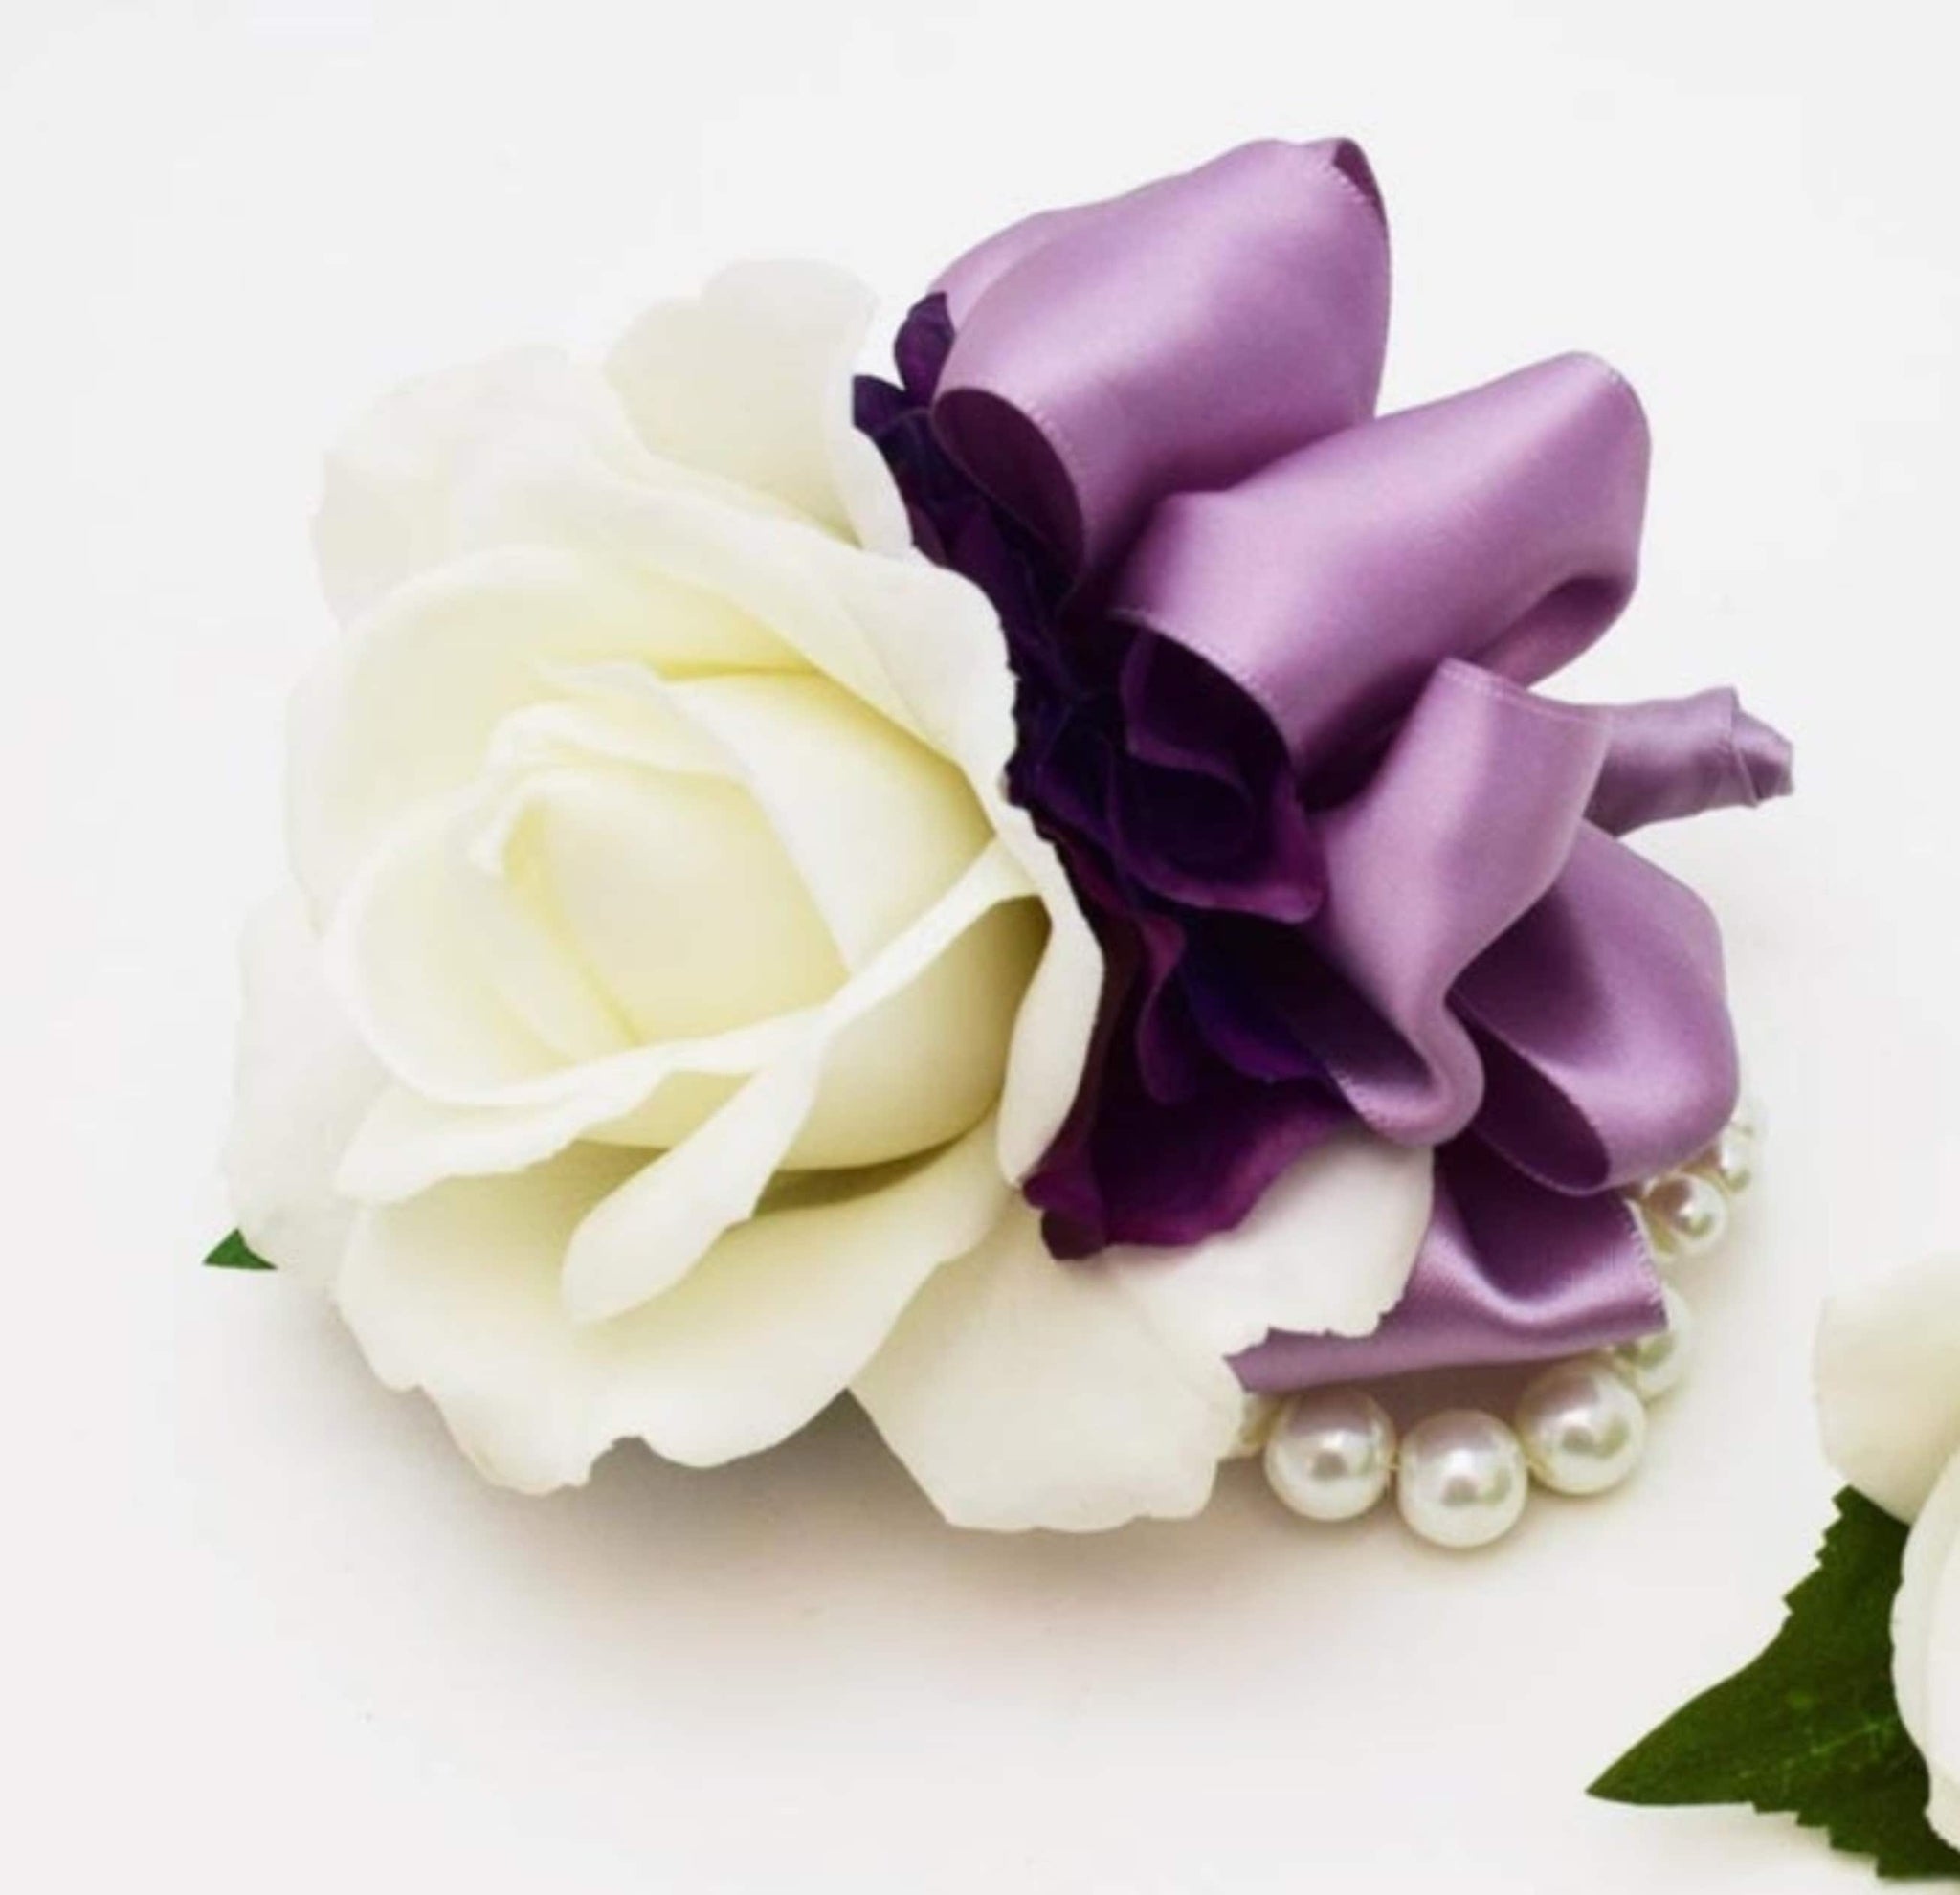 Cascade Wedding Bouquet with Picasso Callas, Real Touch Purple Roses, Tiger Lilies, Lavender Hydrangea - Add a Groom's Boutonniere and More!